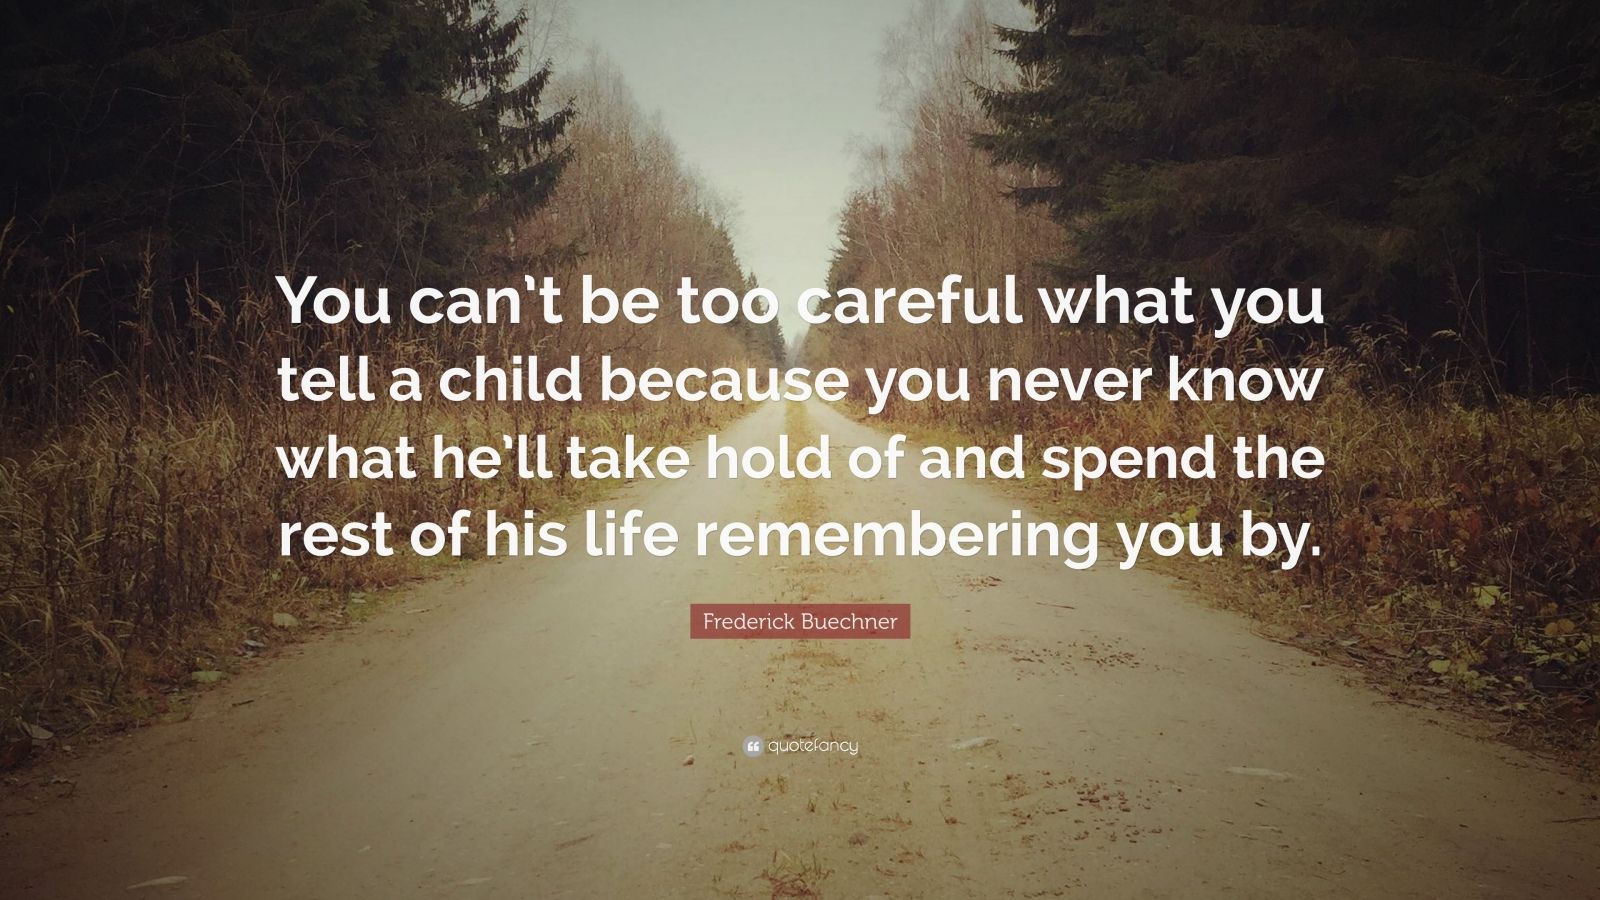 Frederick Buechner Quote: “You can’t be too careful what you tell a ...